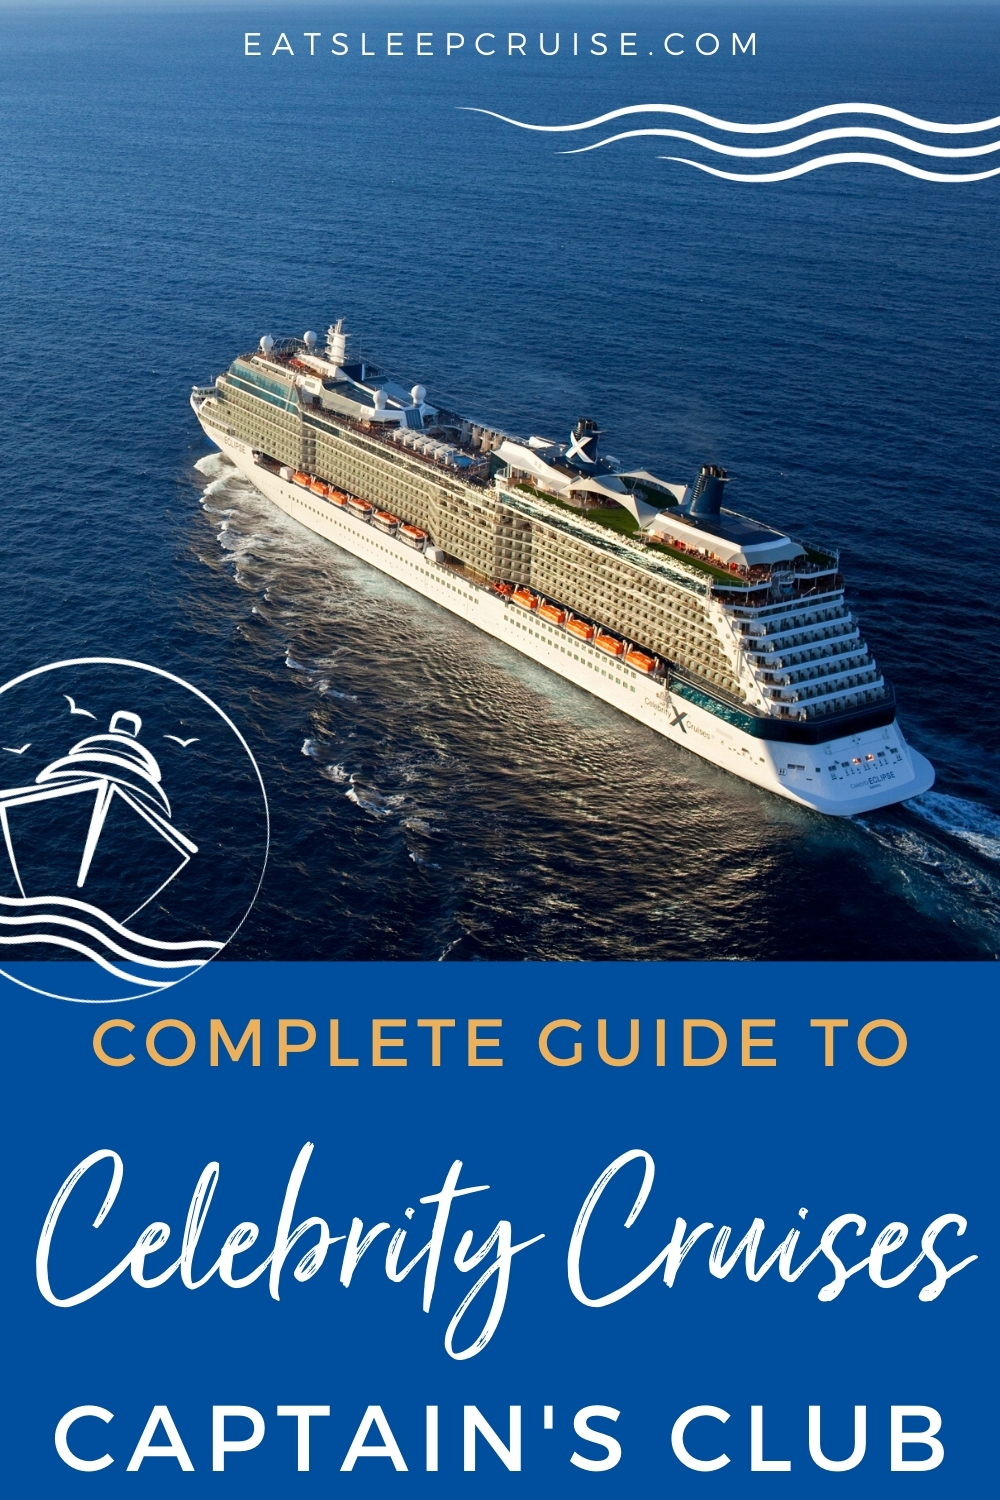 how do i find my celebrity cruise captain's club number